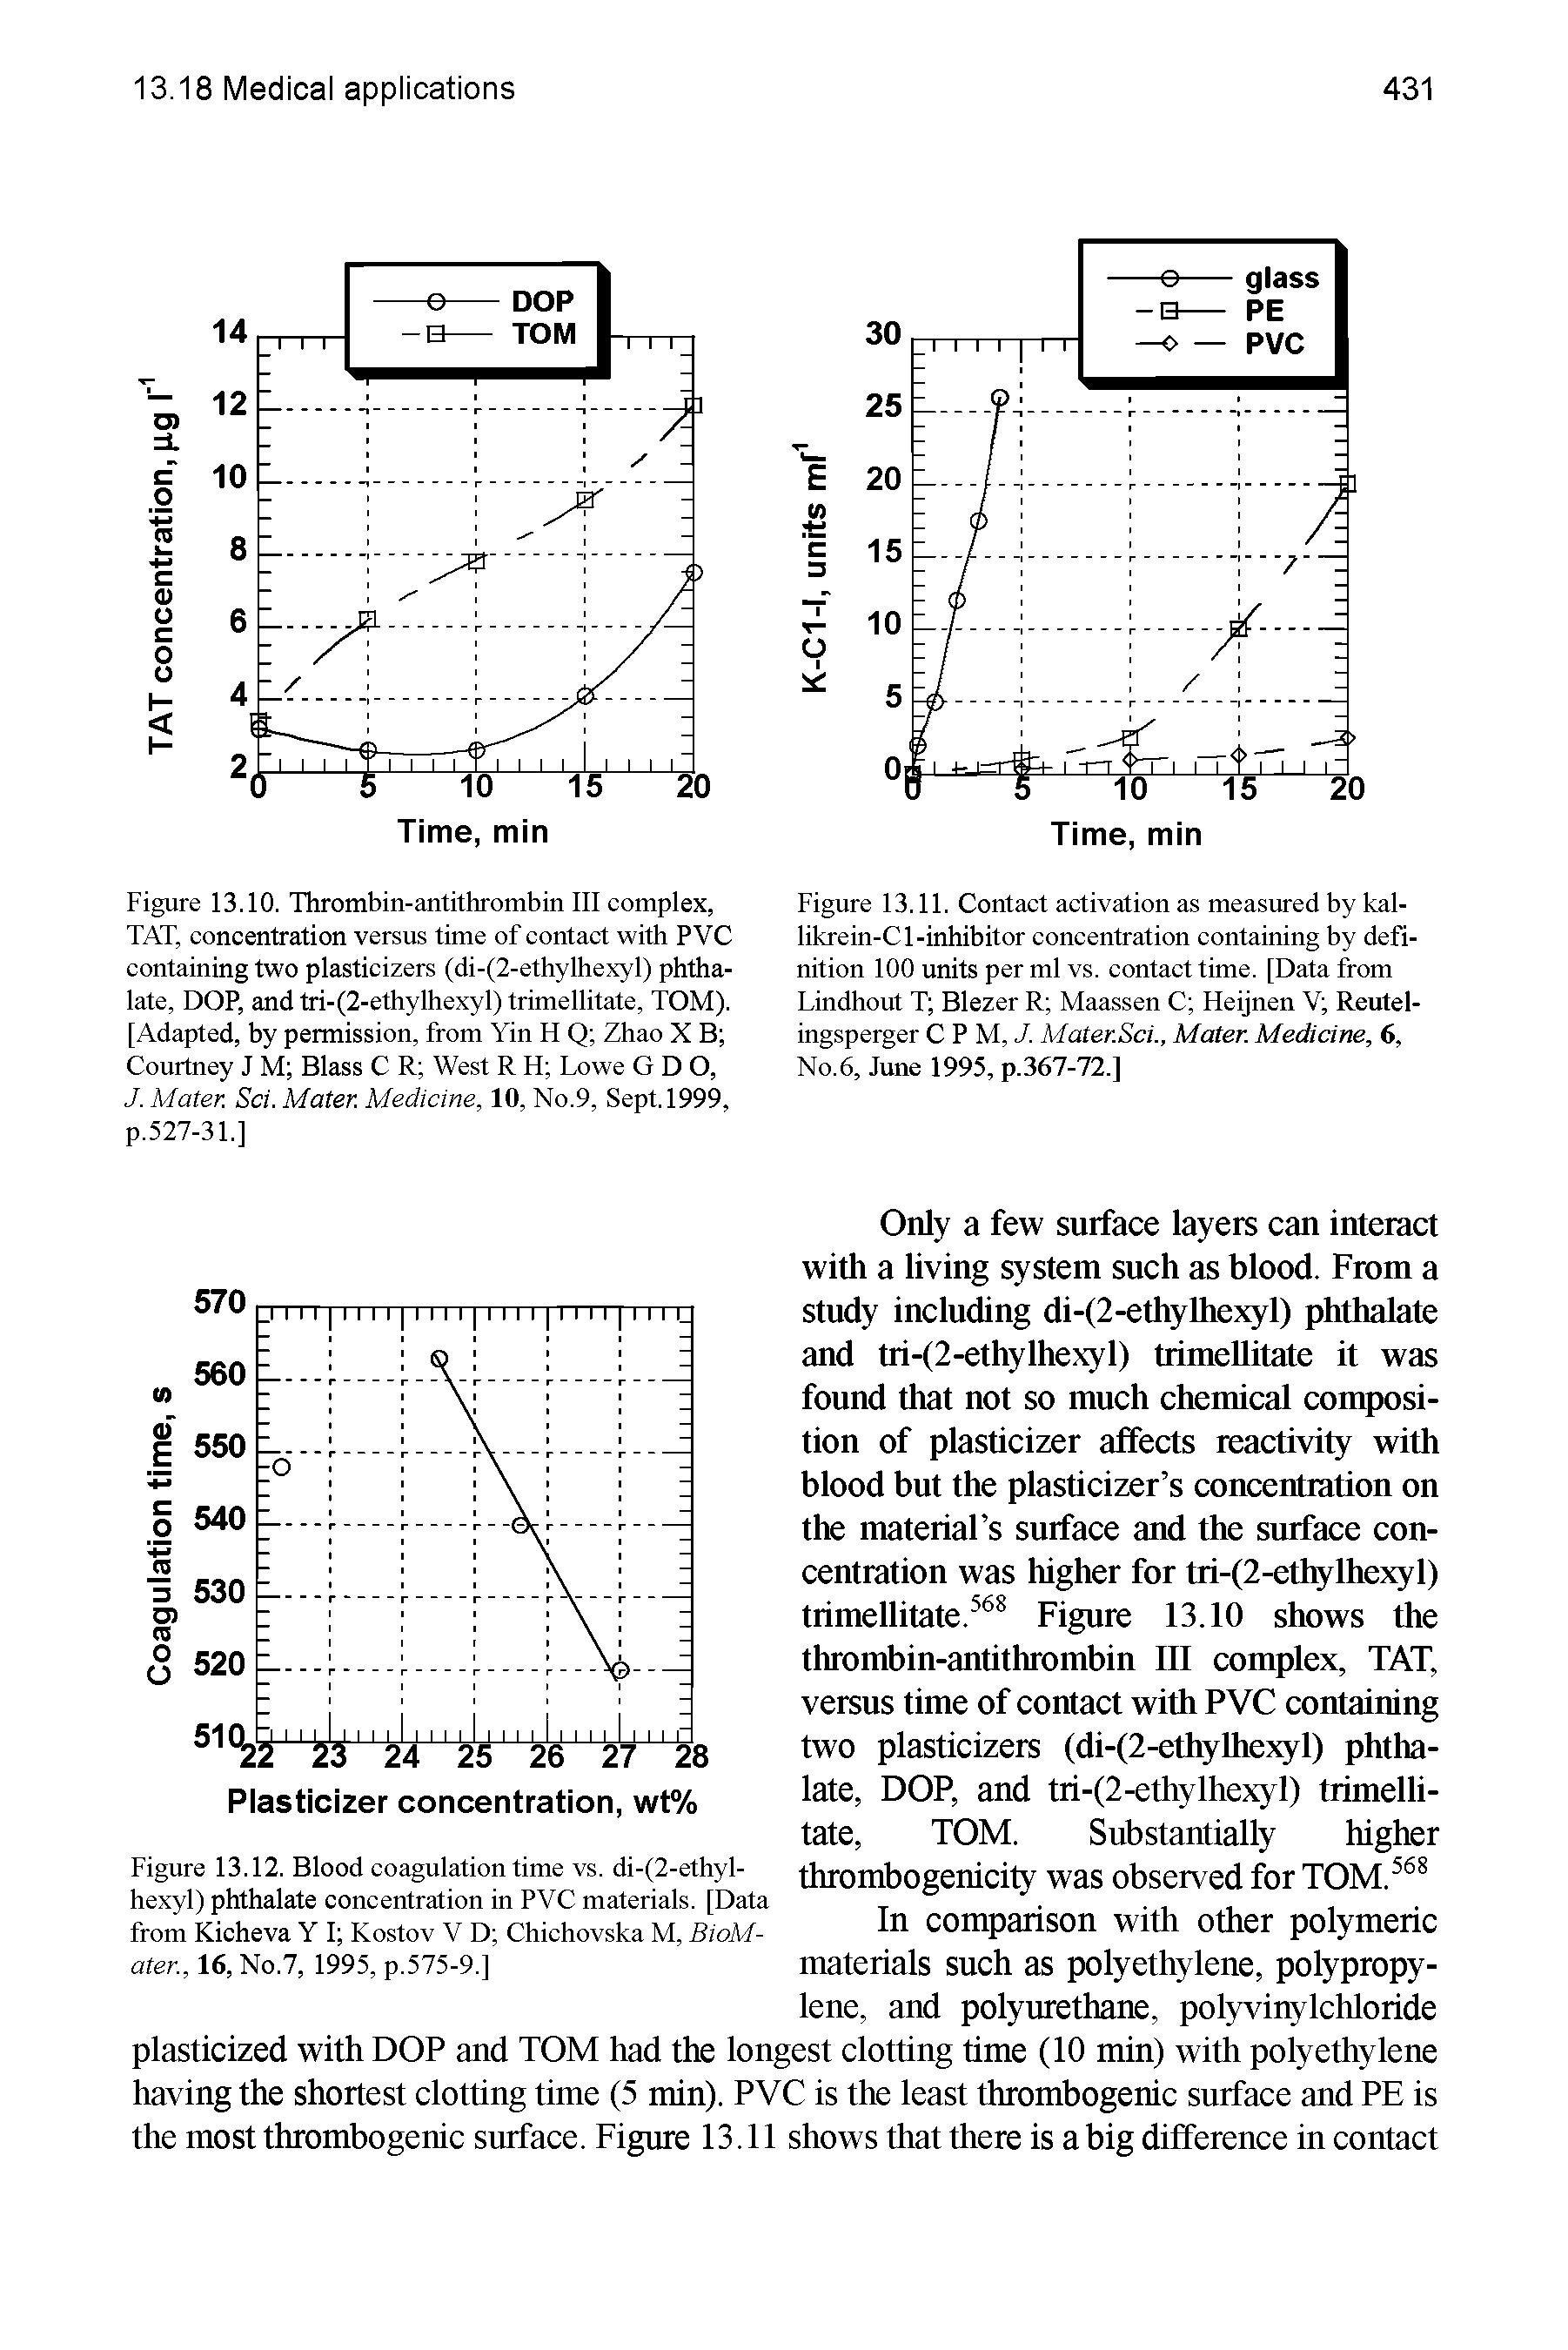 Figure 13.10. Thrombin-antithrombin III complex, TAT, concentration versus time of contact with PVC containing two plasticizers (di-(2-ethylhexyl) phtha-late, DOP, and tri-(2-ethylhexyl) trimellitate, TOM). [Adapted, by permission, from Yin FI Q Zhao X B Courtney J M Blass C R West R FI Lowe G D O, J. Mater. Sci. Mater Medicine, 10, No.9, Sept. 1999, p.527-31.]...